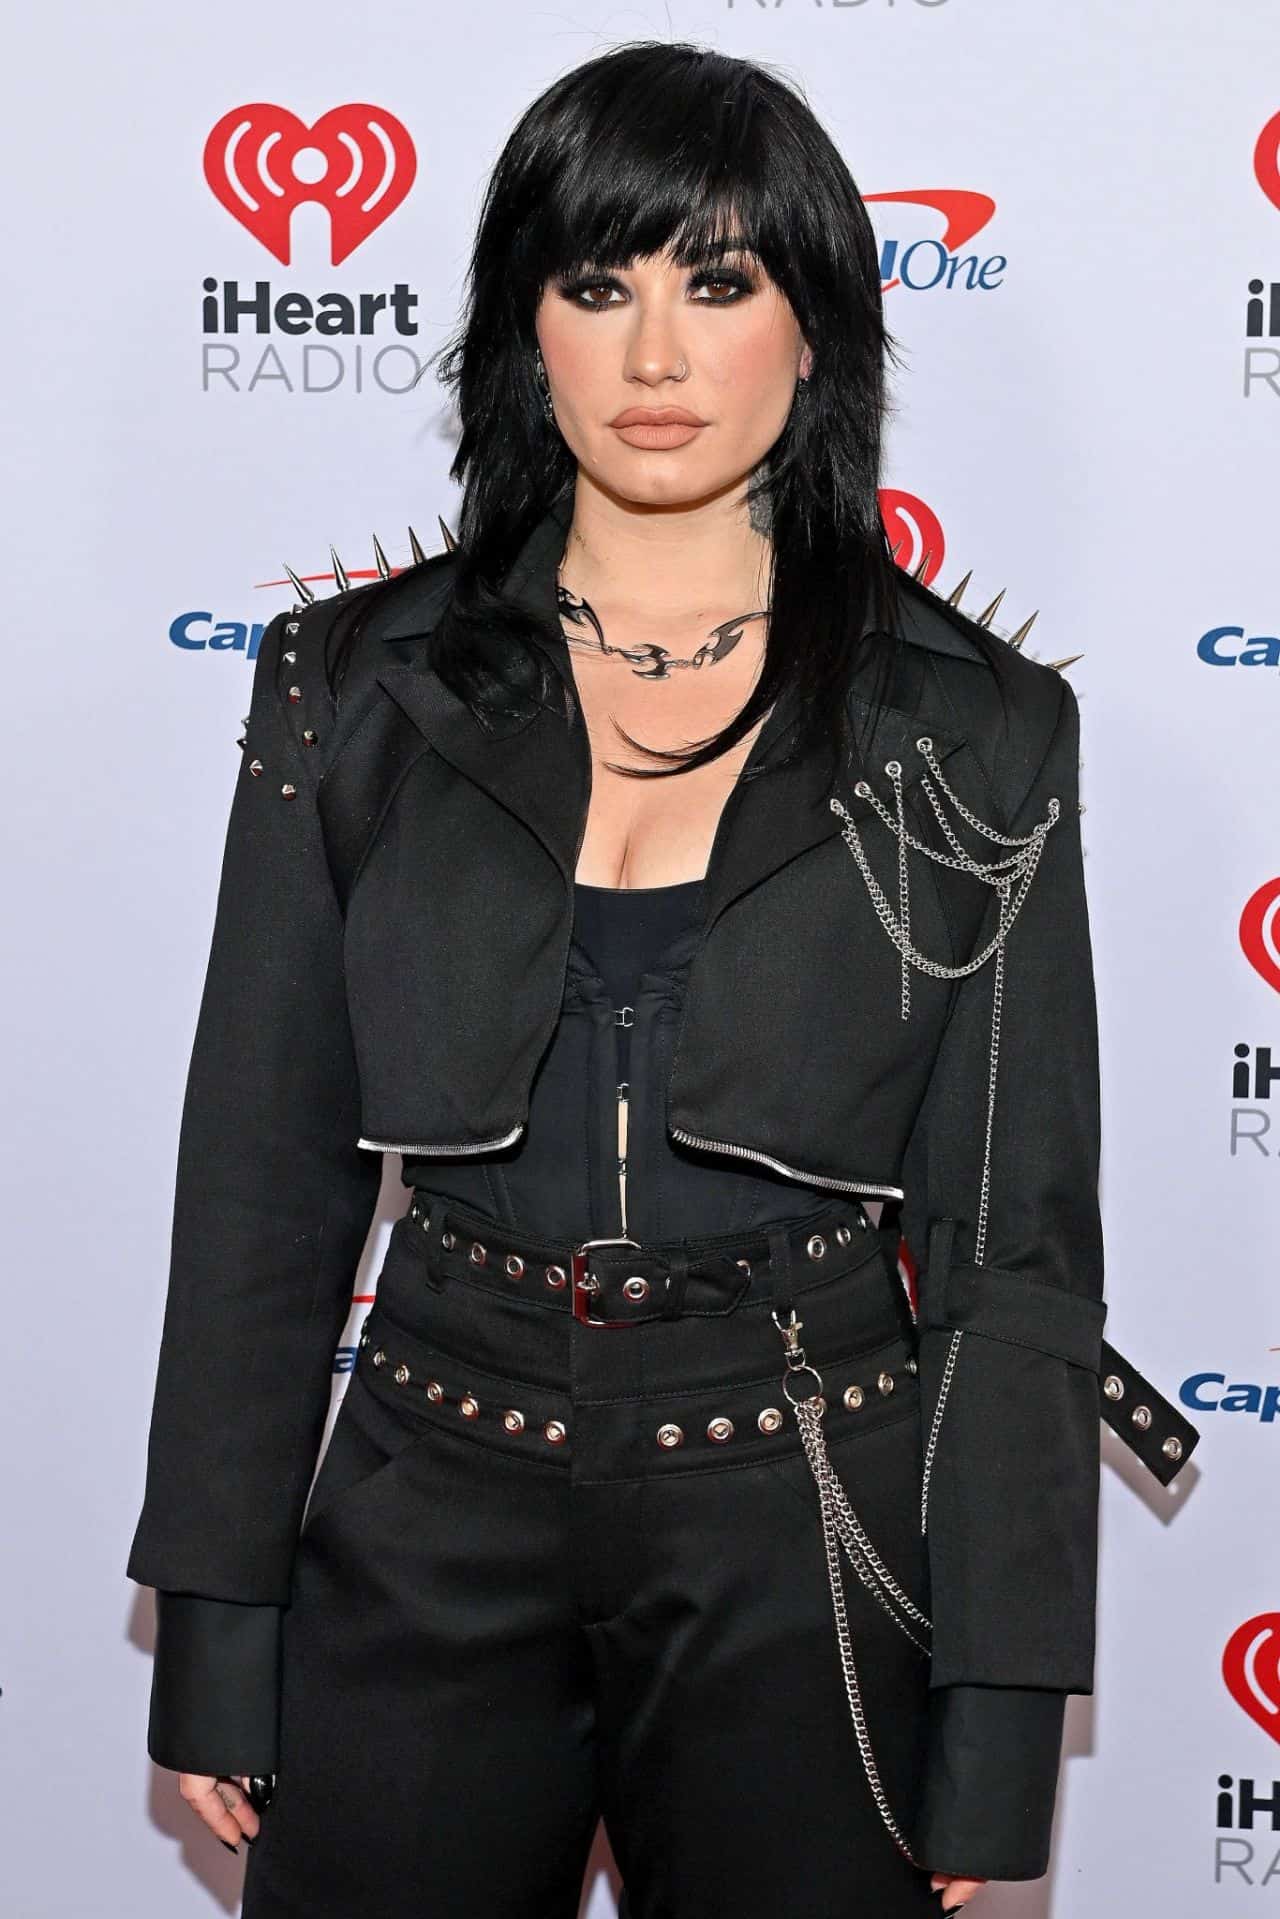 Demi Lovato Performs at Z100’s iHeartRadio 2022 Jingle Ball in NYC